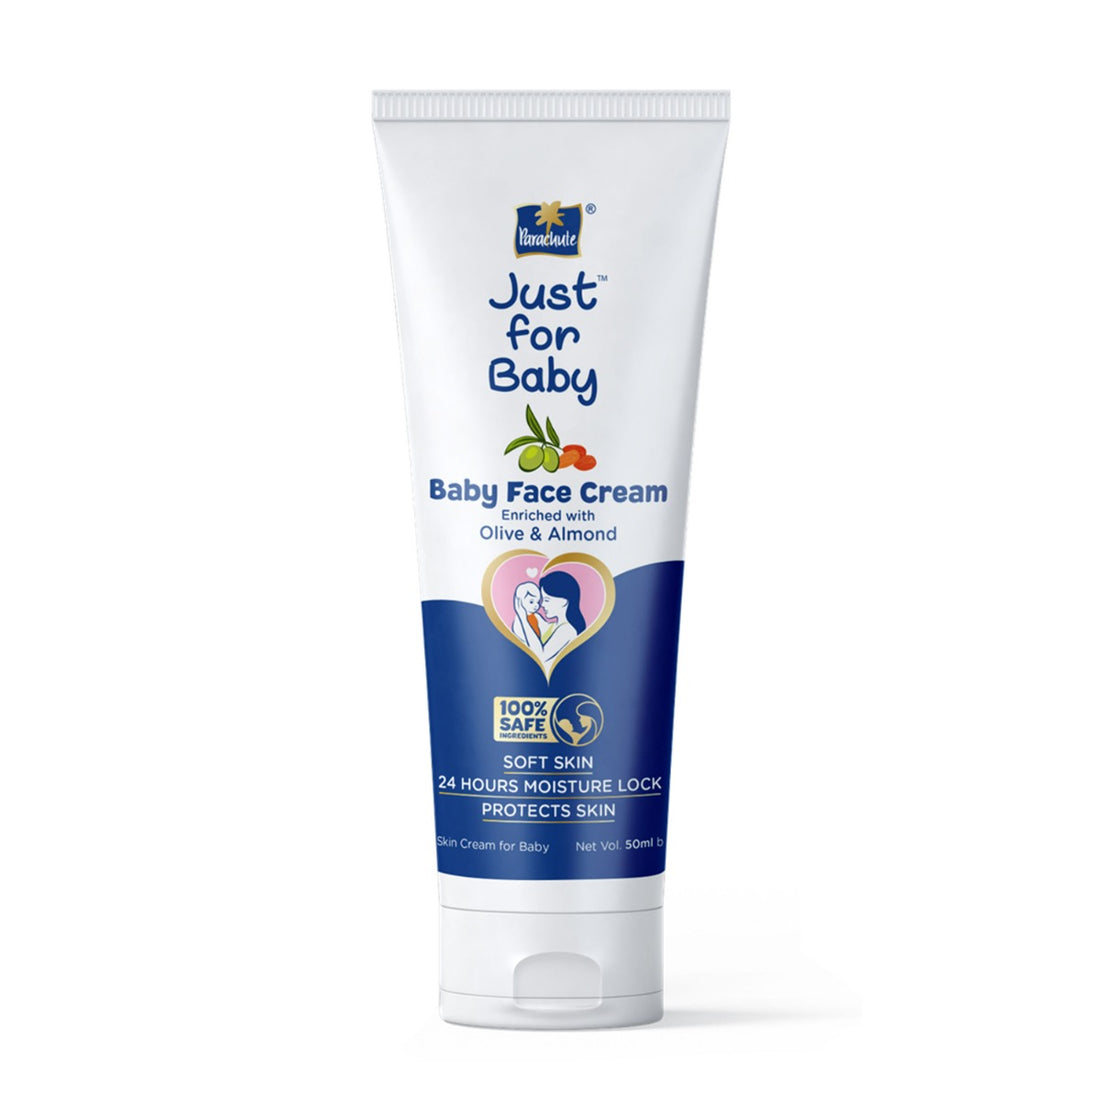 Parachute Just for Baby - Baby Oil 200ml (Baby Face Cream 50g FREE)